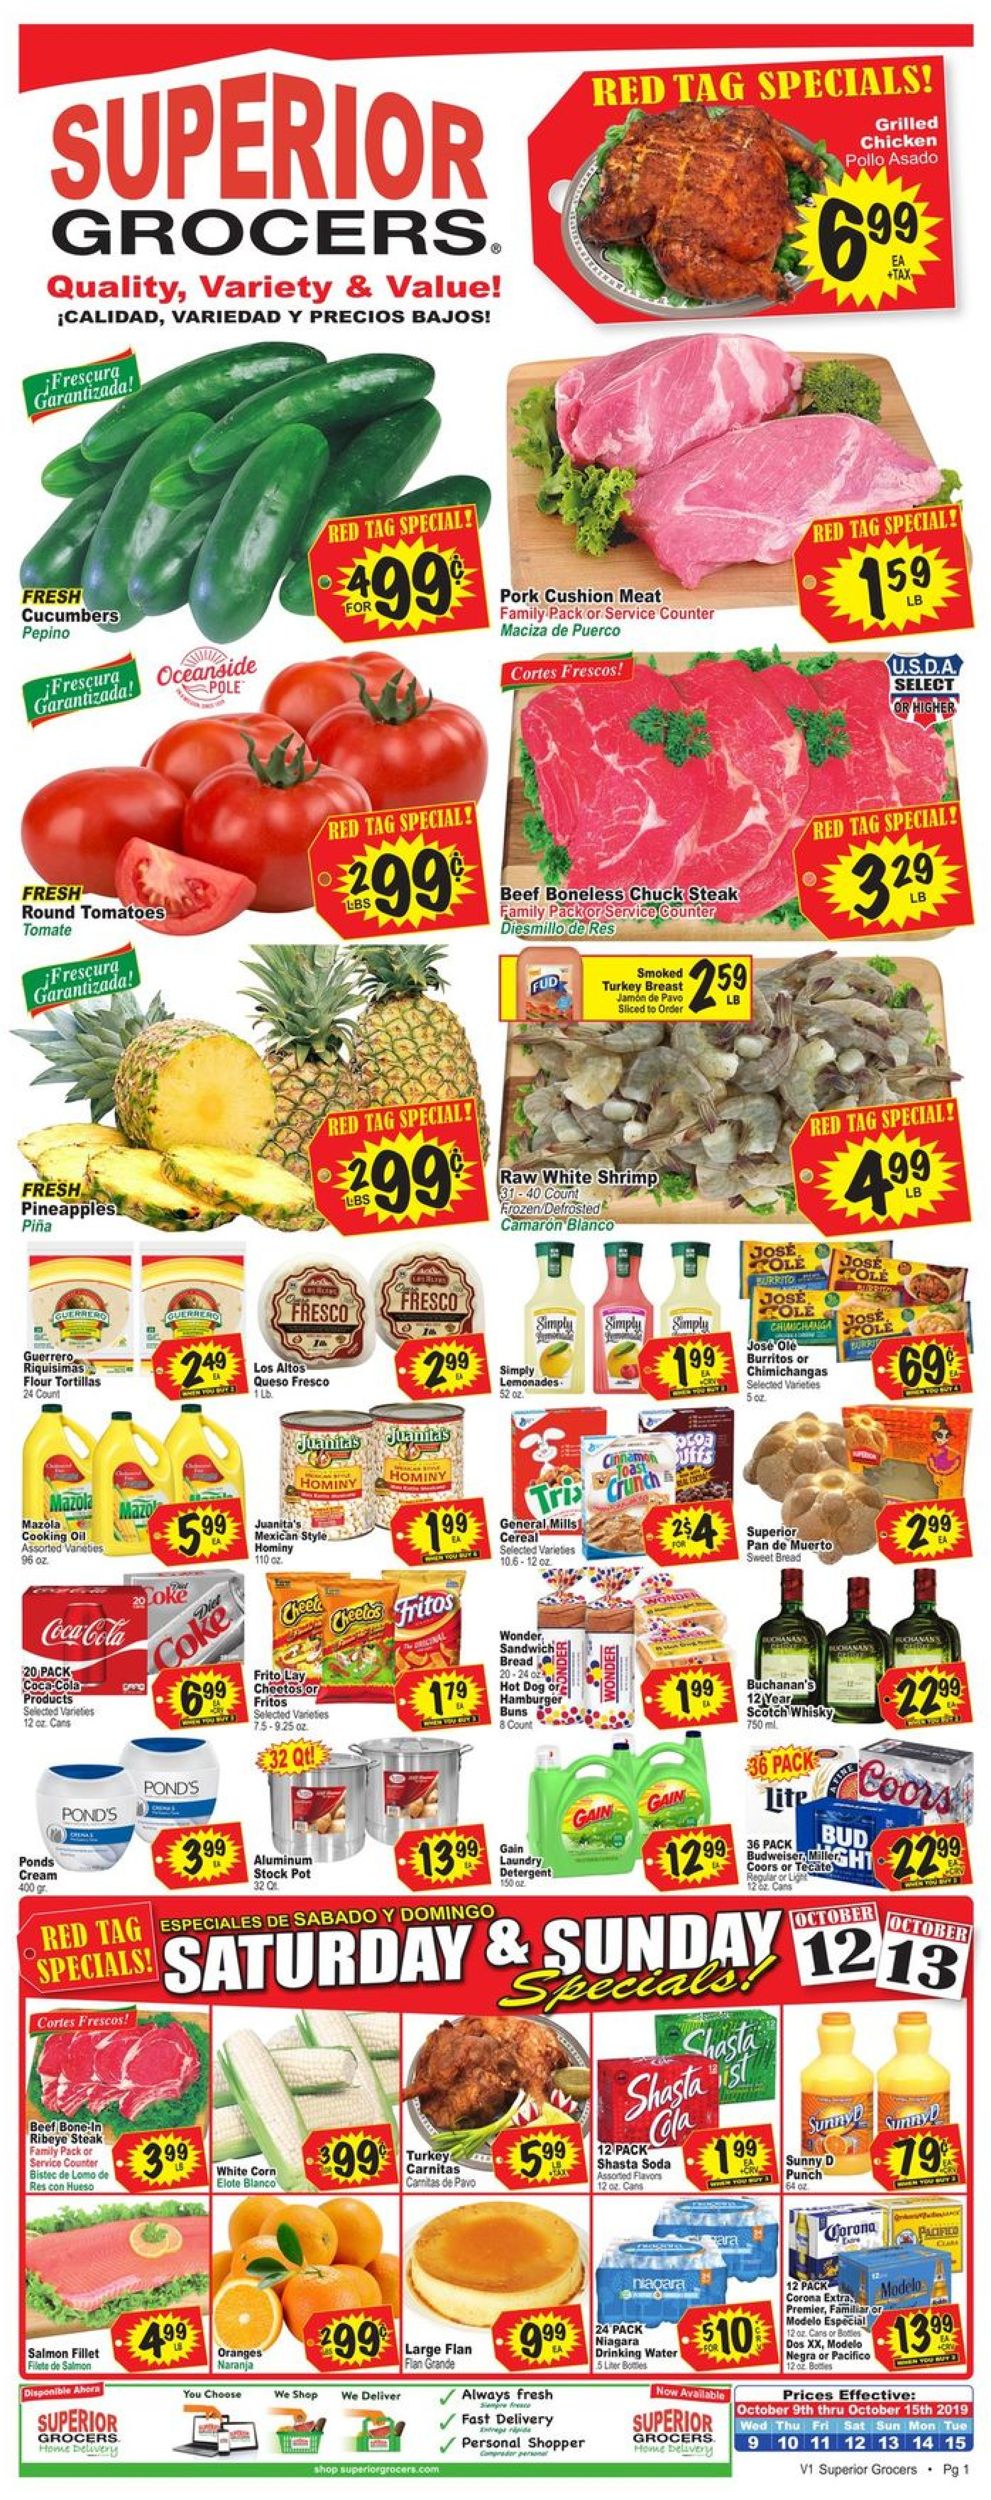 Superior Grocers Current weekly ad 10/09 - 10/15/2019 - frequent-ads.com